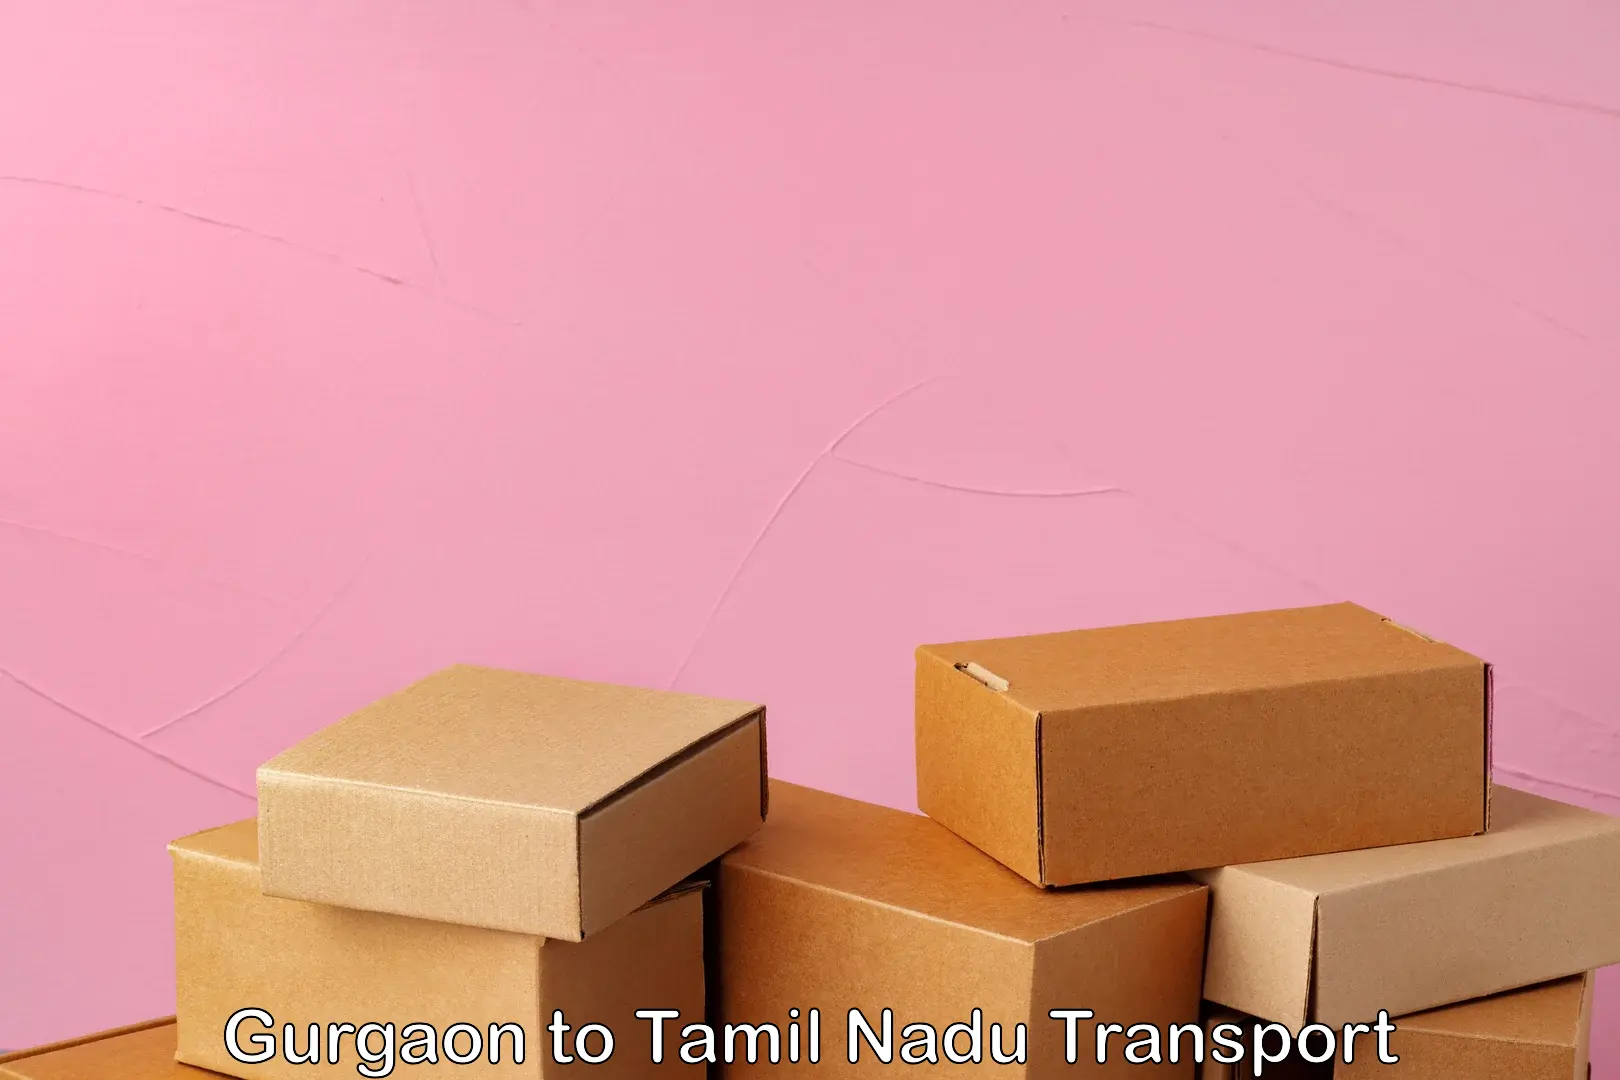 Express transport services Gurgaon to Trichy